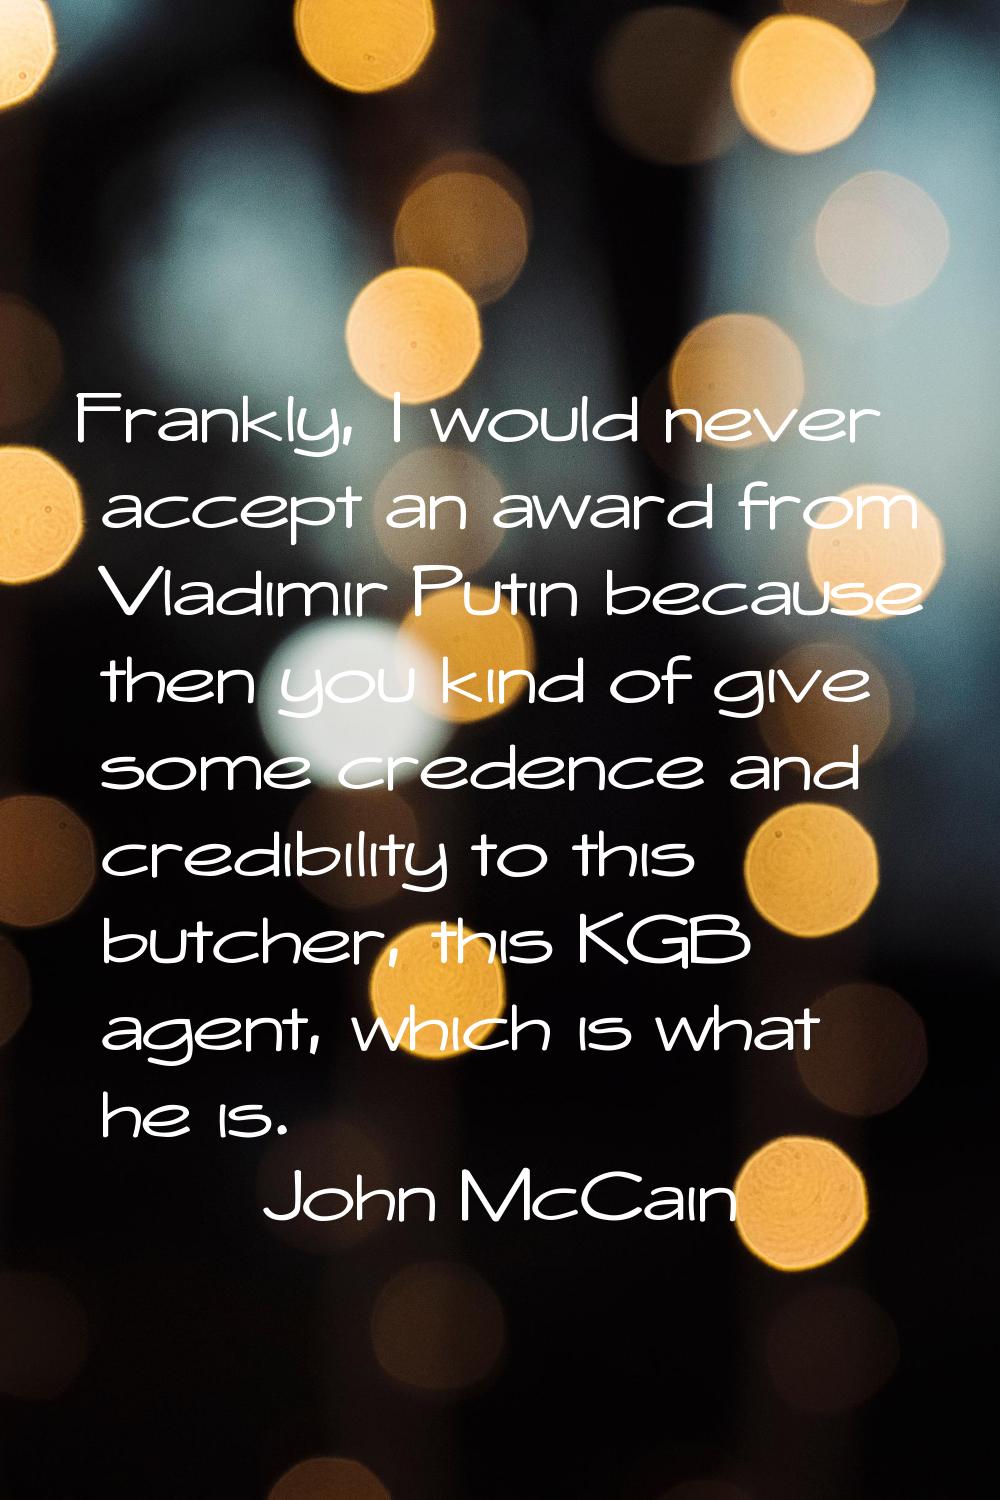 Frankly, I would never accept an award from Vladimir Putin because then you kind of give some crede